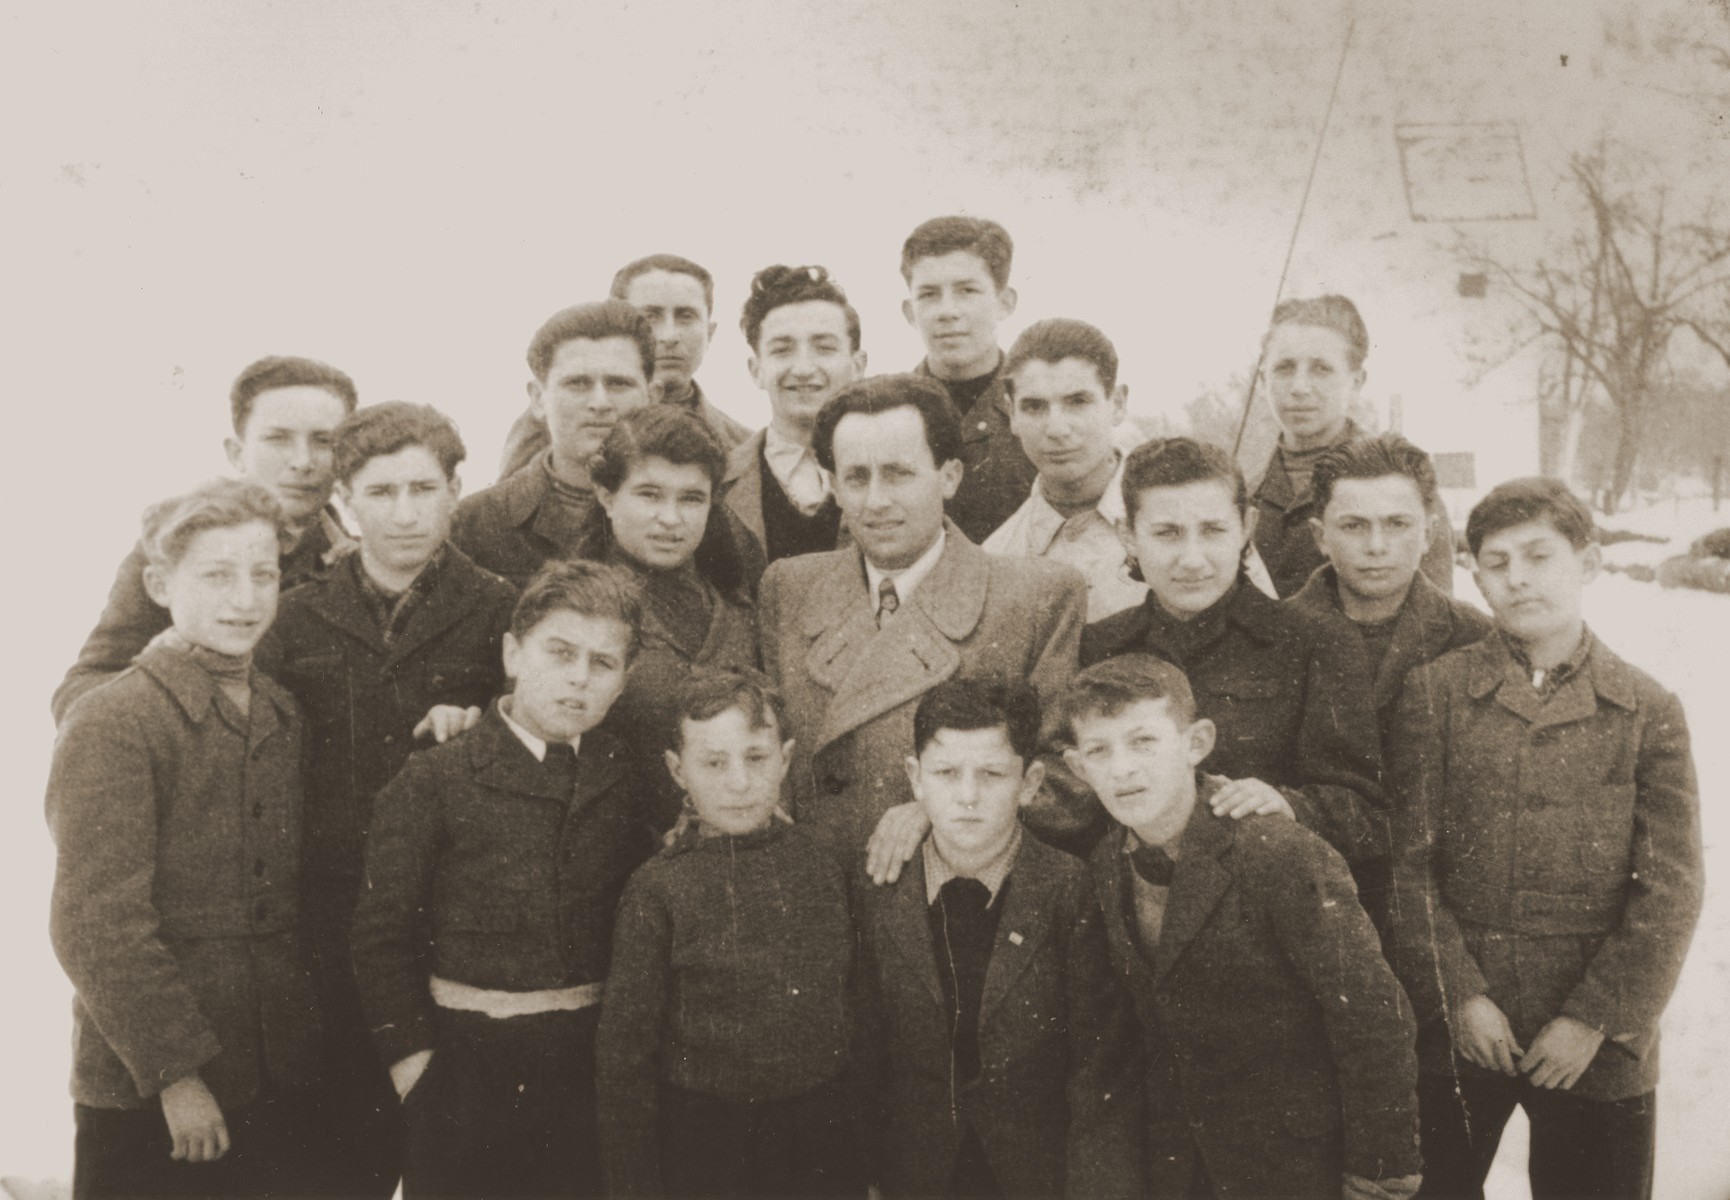 Group portrait of Jewish youth at the Tarbut school in the Gabersee displaced persons camp.

Among those pictured are Yitzhak Appelbaum (front row, left), Martin Thau (front row, third from the left), Henia Spielman (second row, third from the left),  Motel Appelbaum (front row, right), and Mania Kronisch (second row, third from right), and Munio Zeiger (back row, center).